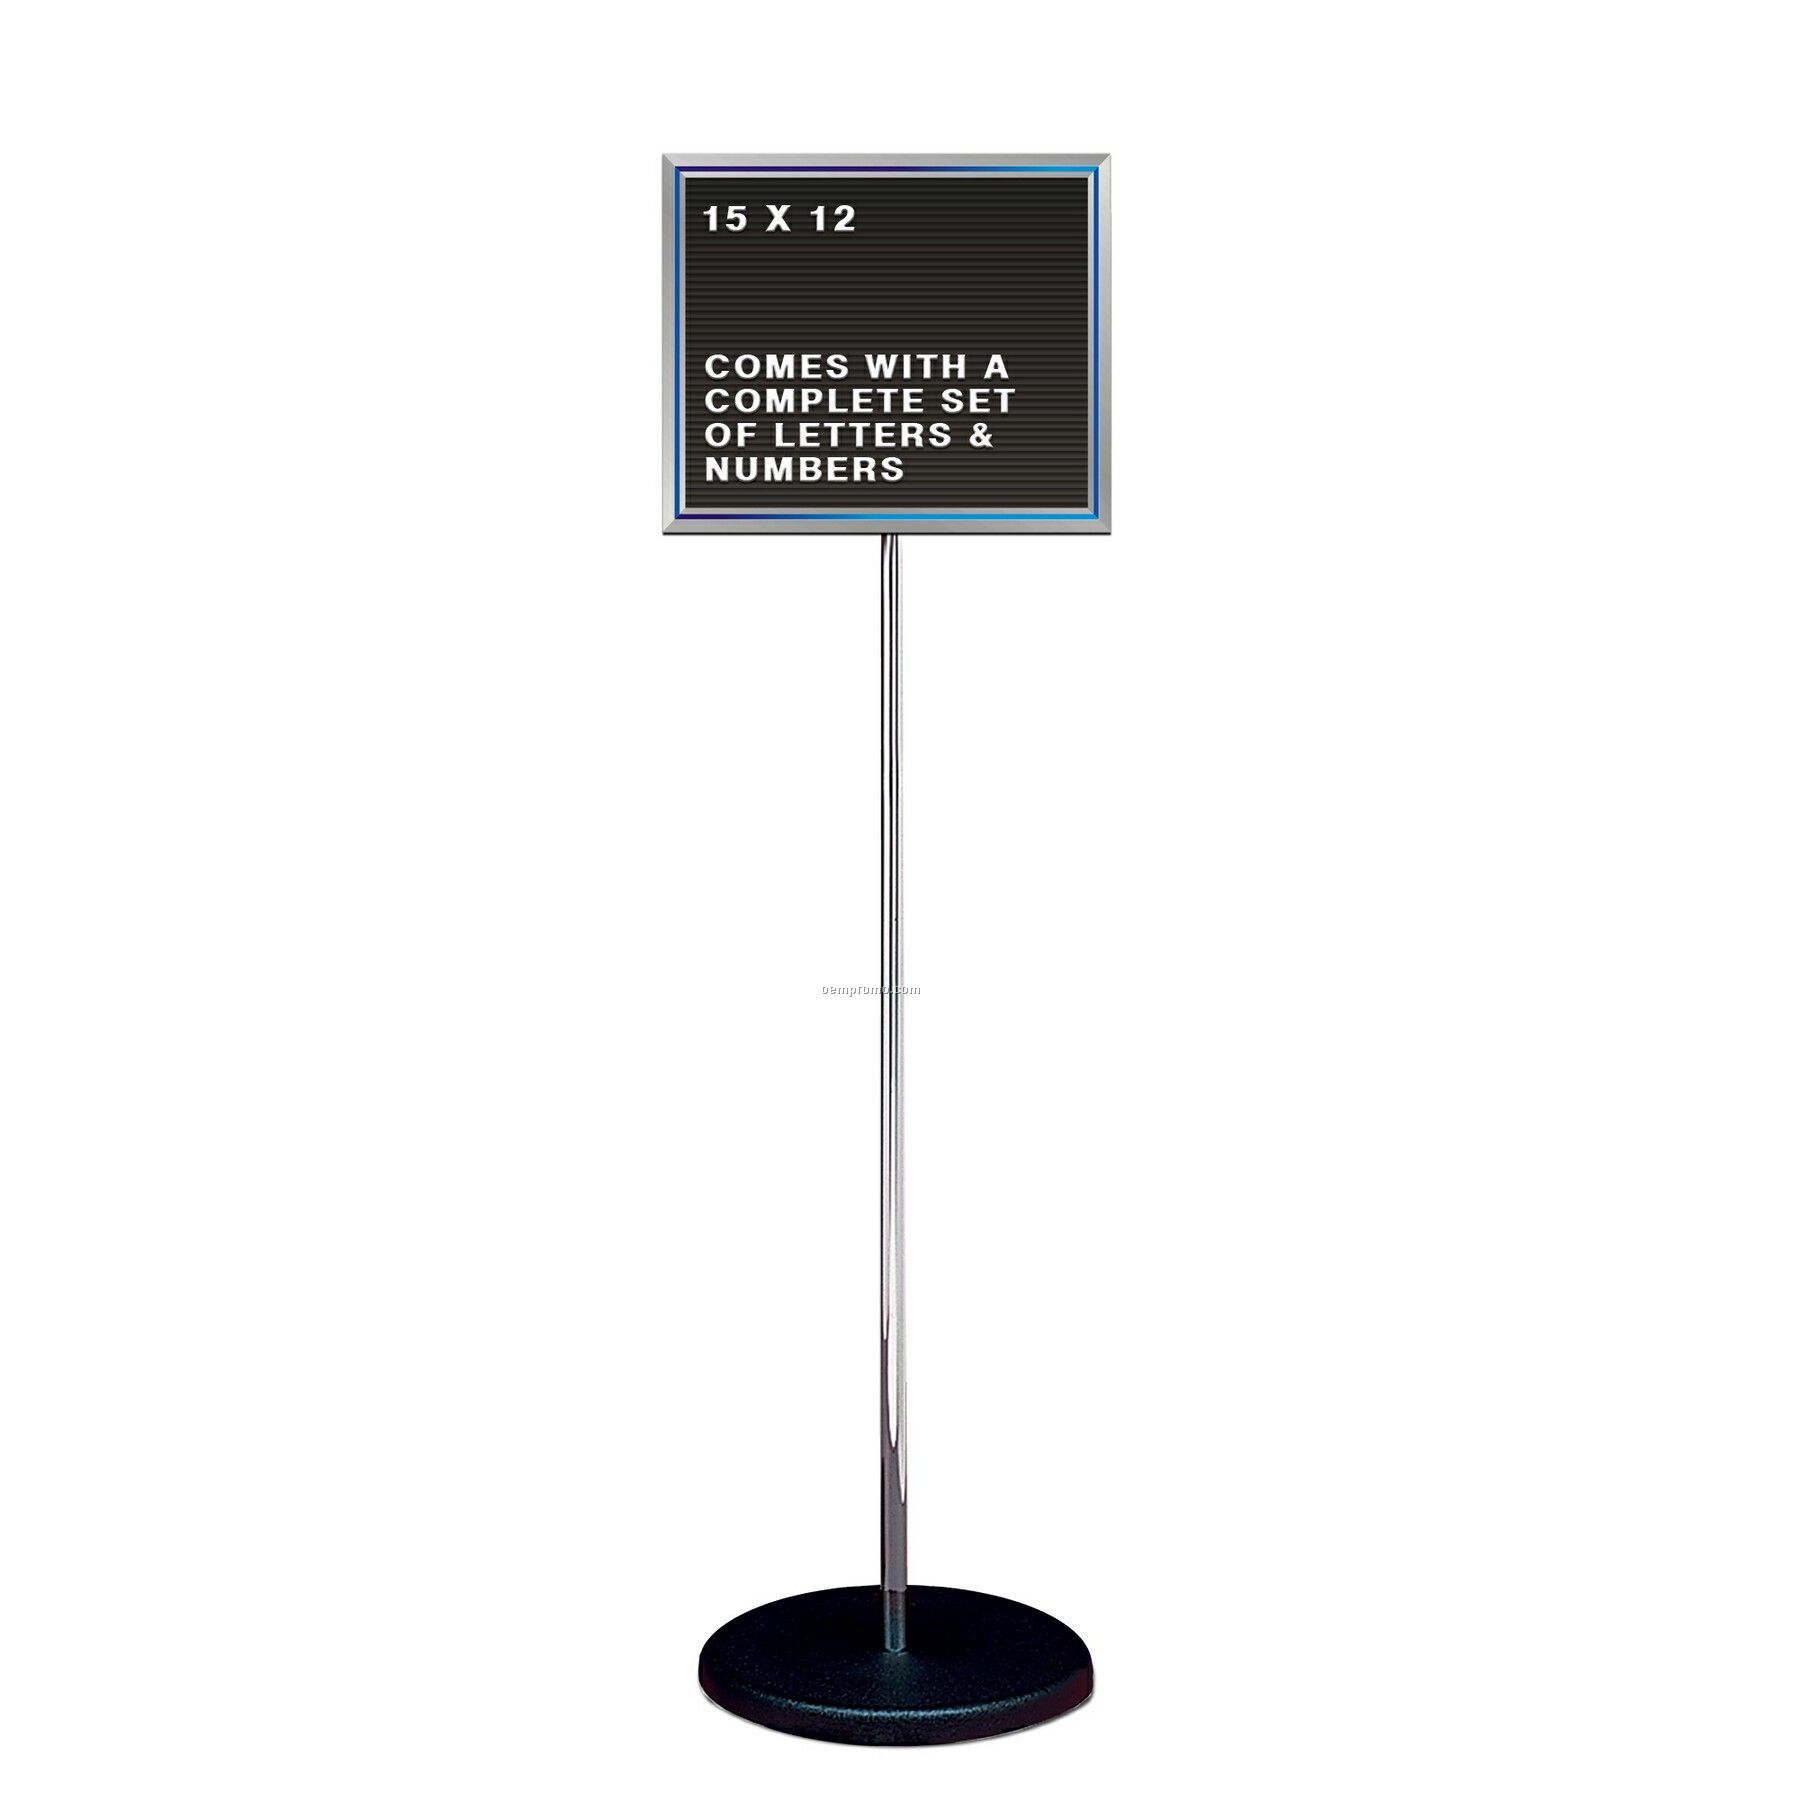 Free Standing Changeable Letter Board W/ Chrome Pole Stand (15